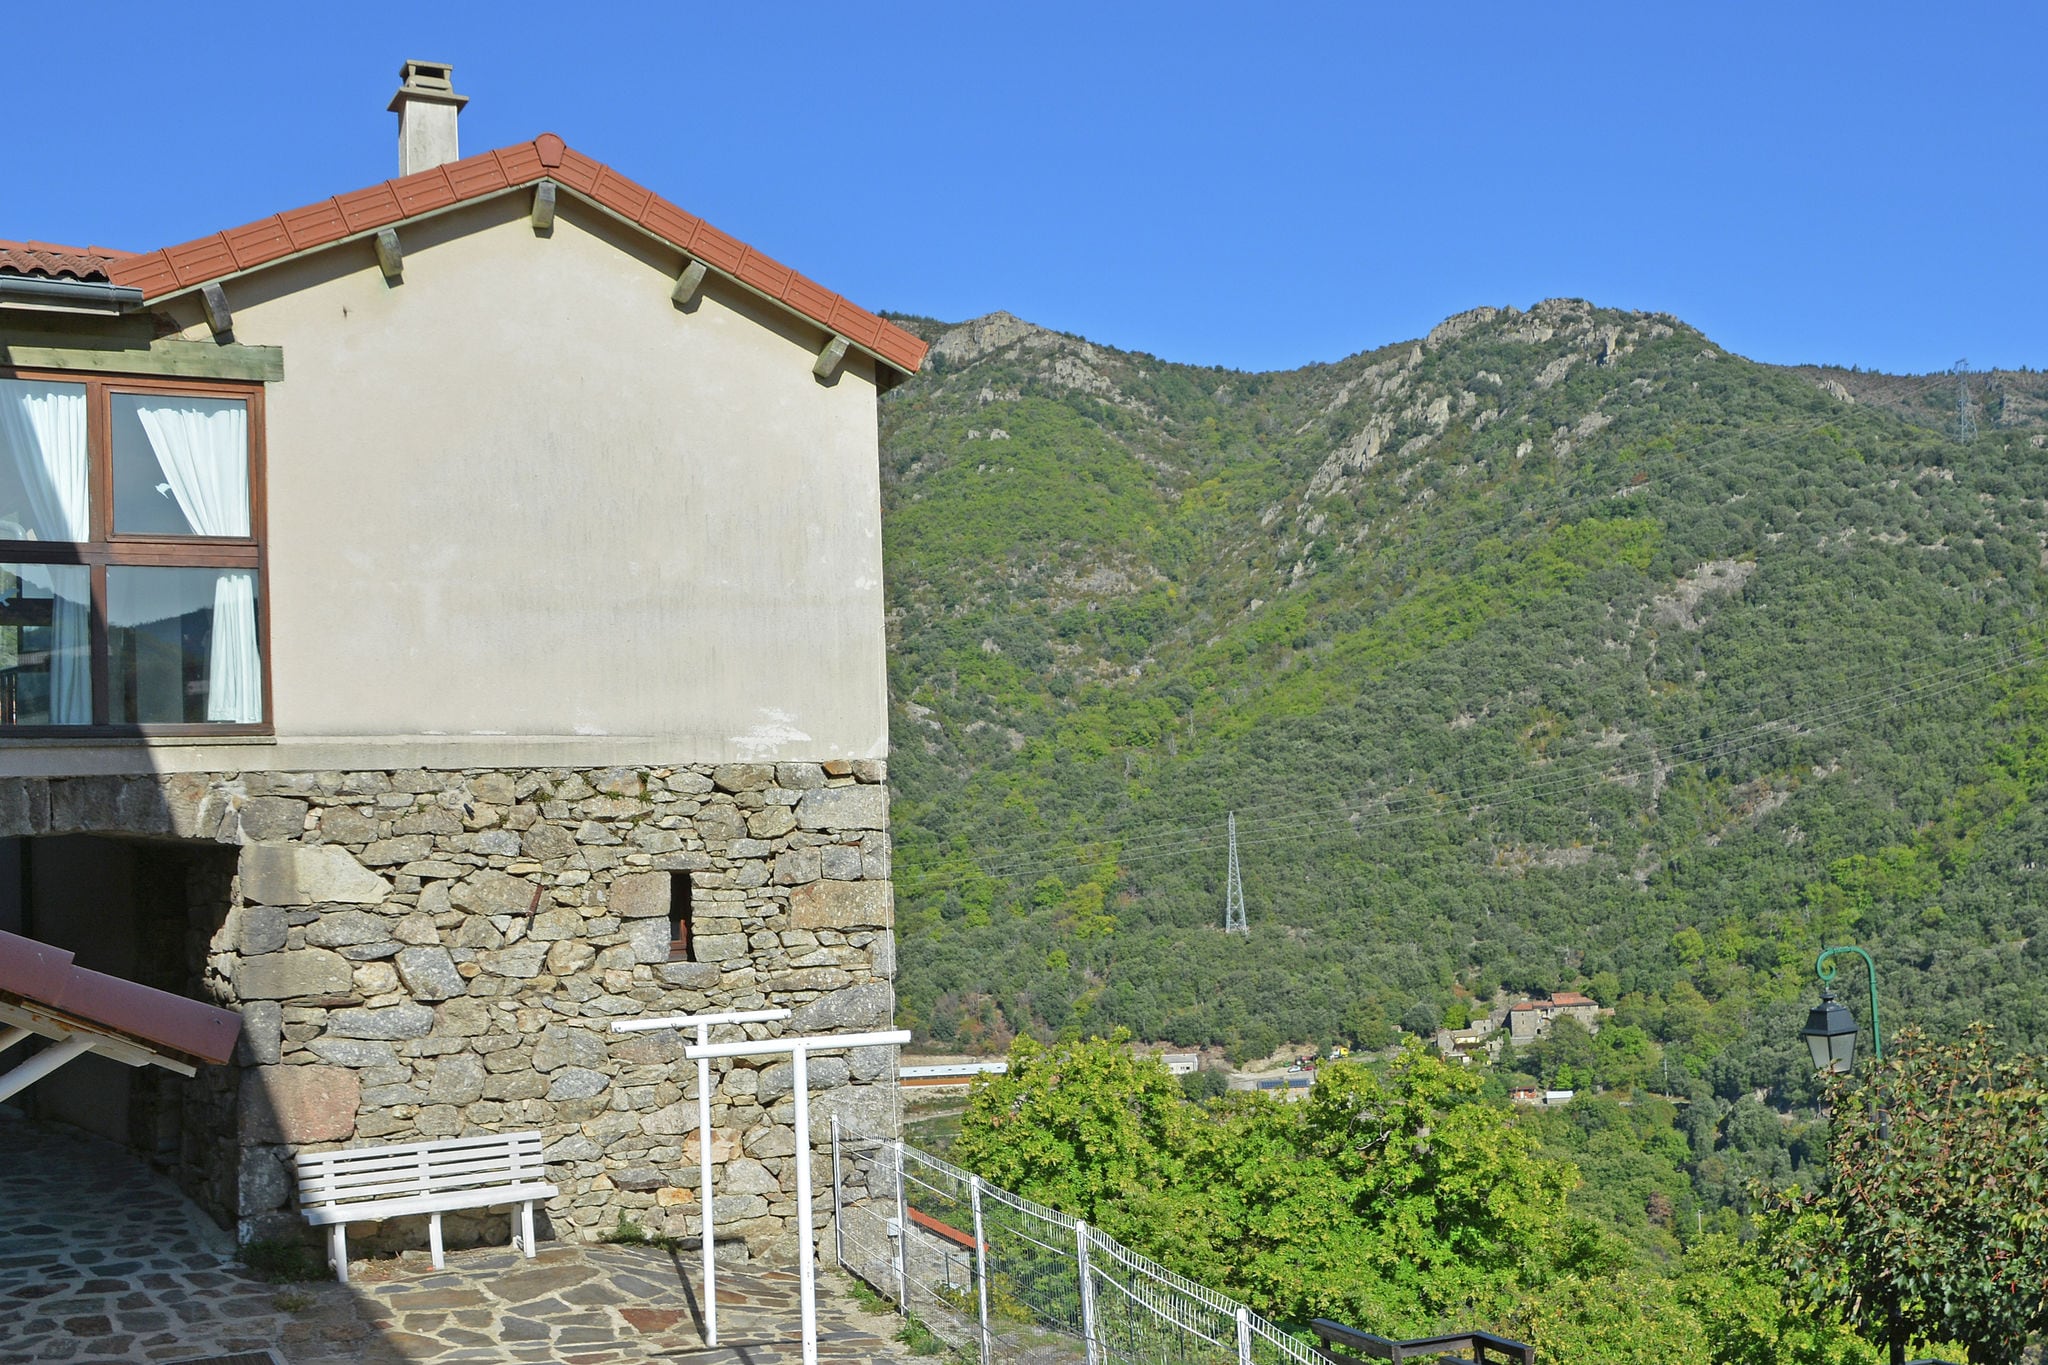 Villa in the Cevennes on the border of the Ardèche and stunning views of a lake